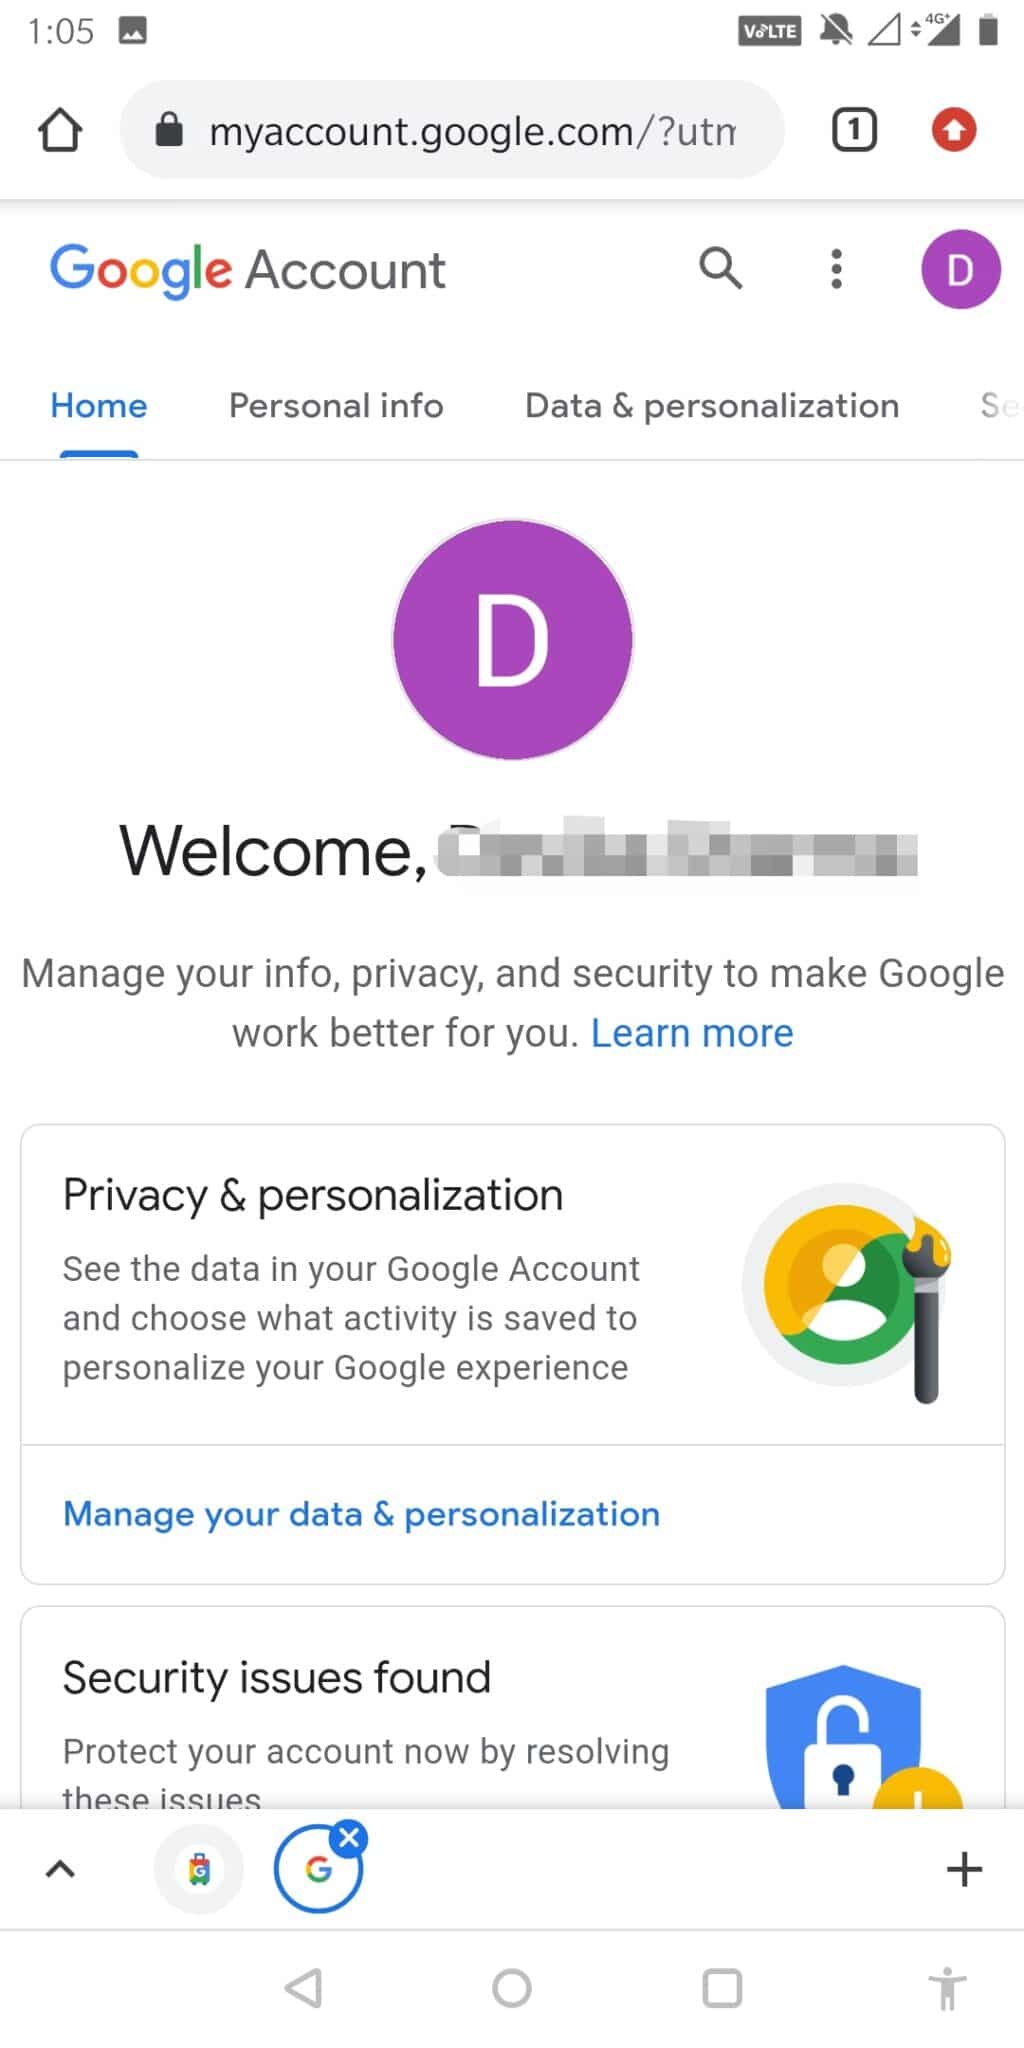 You will now be redirected to your Google Account Settings